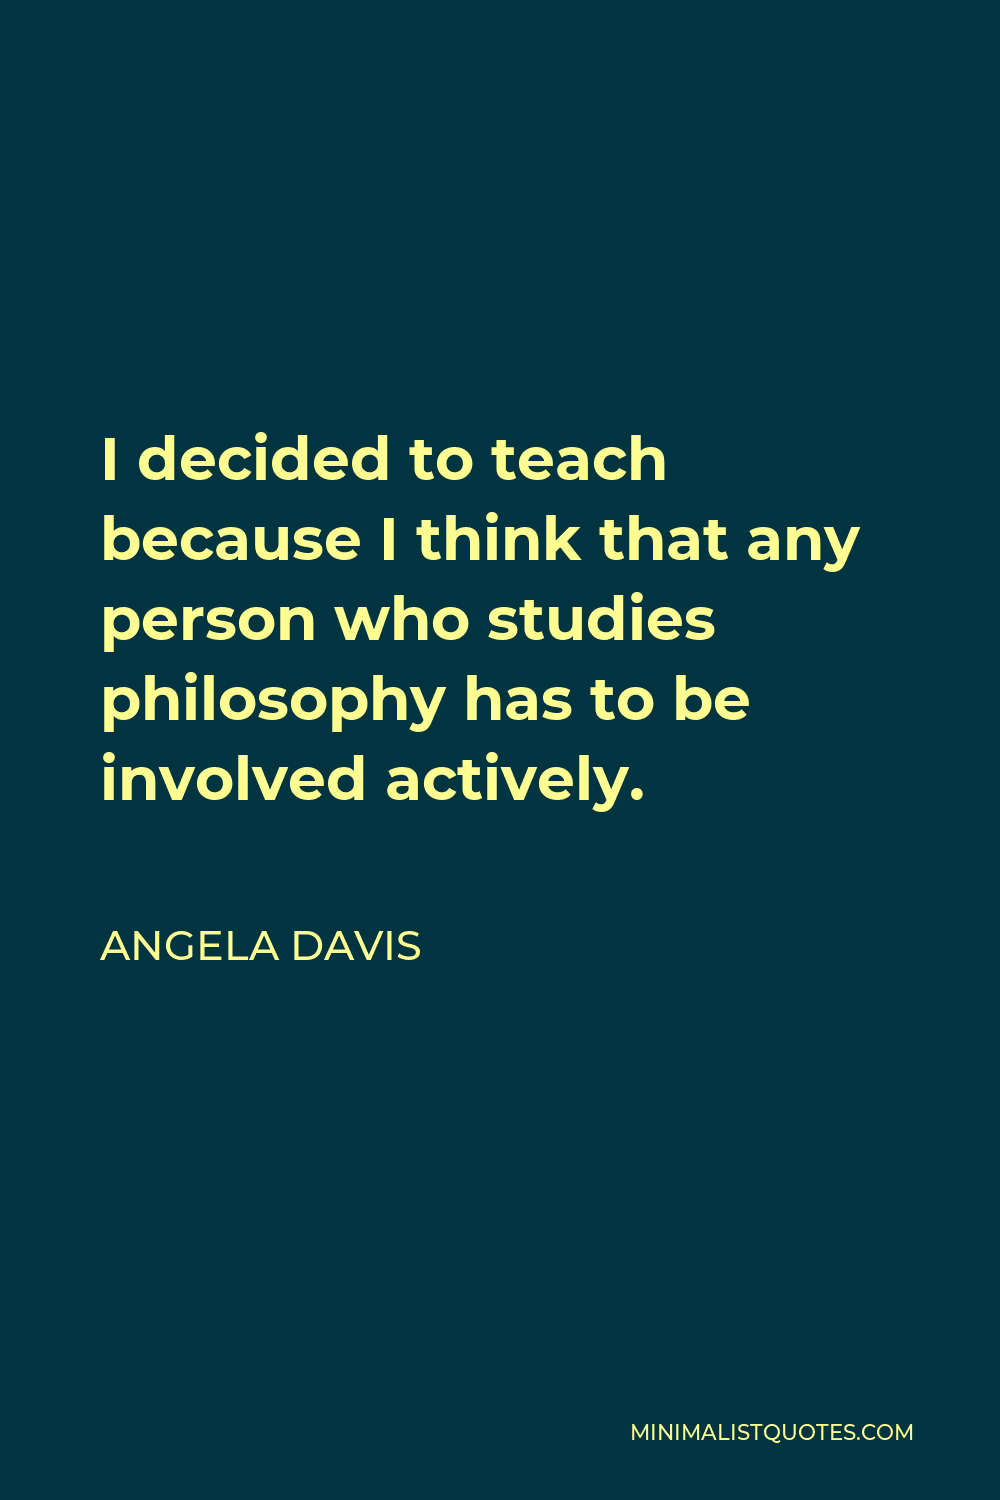 Angela Davis Quote - I decided to teach because I think that any person who studies philosophy has to be involved actively.